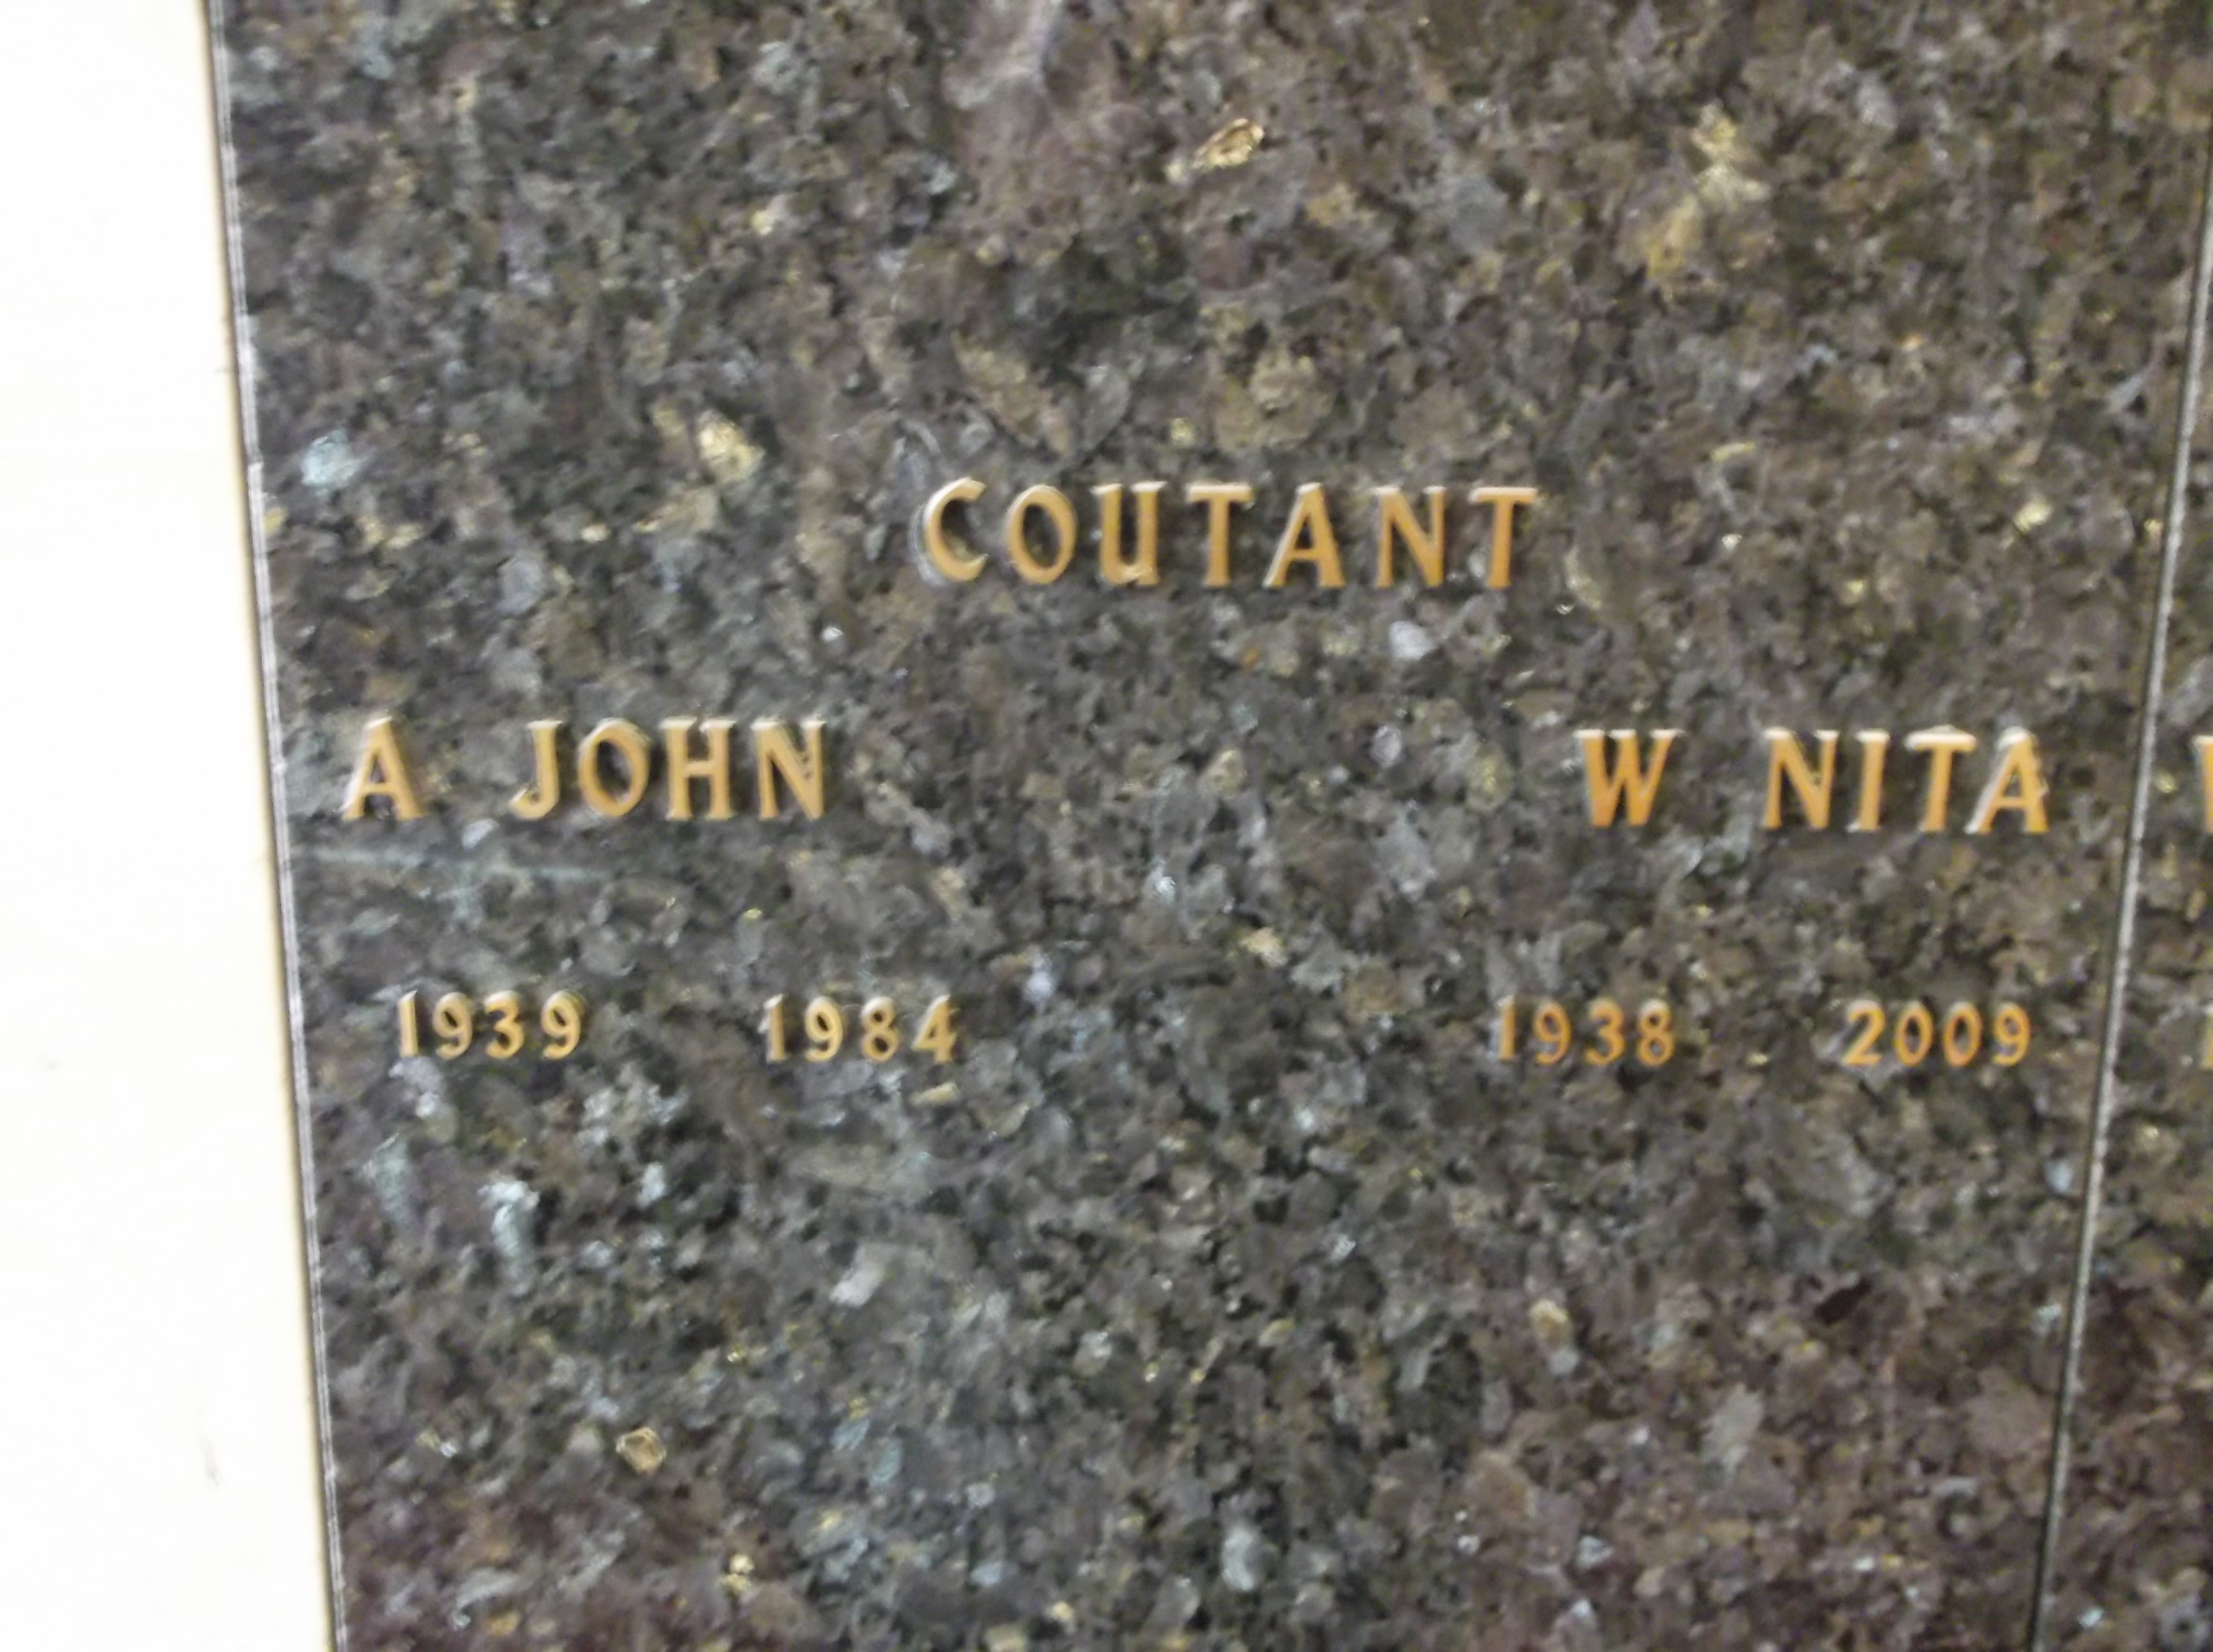 A John Coutant